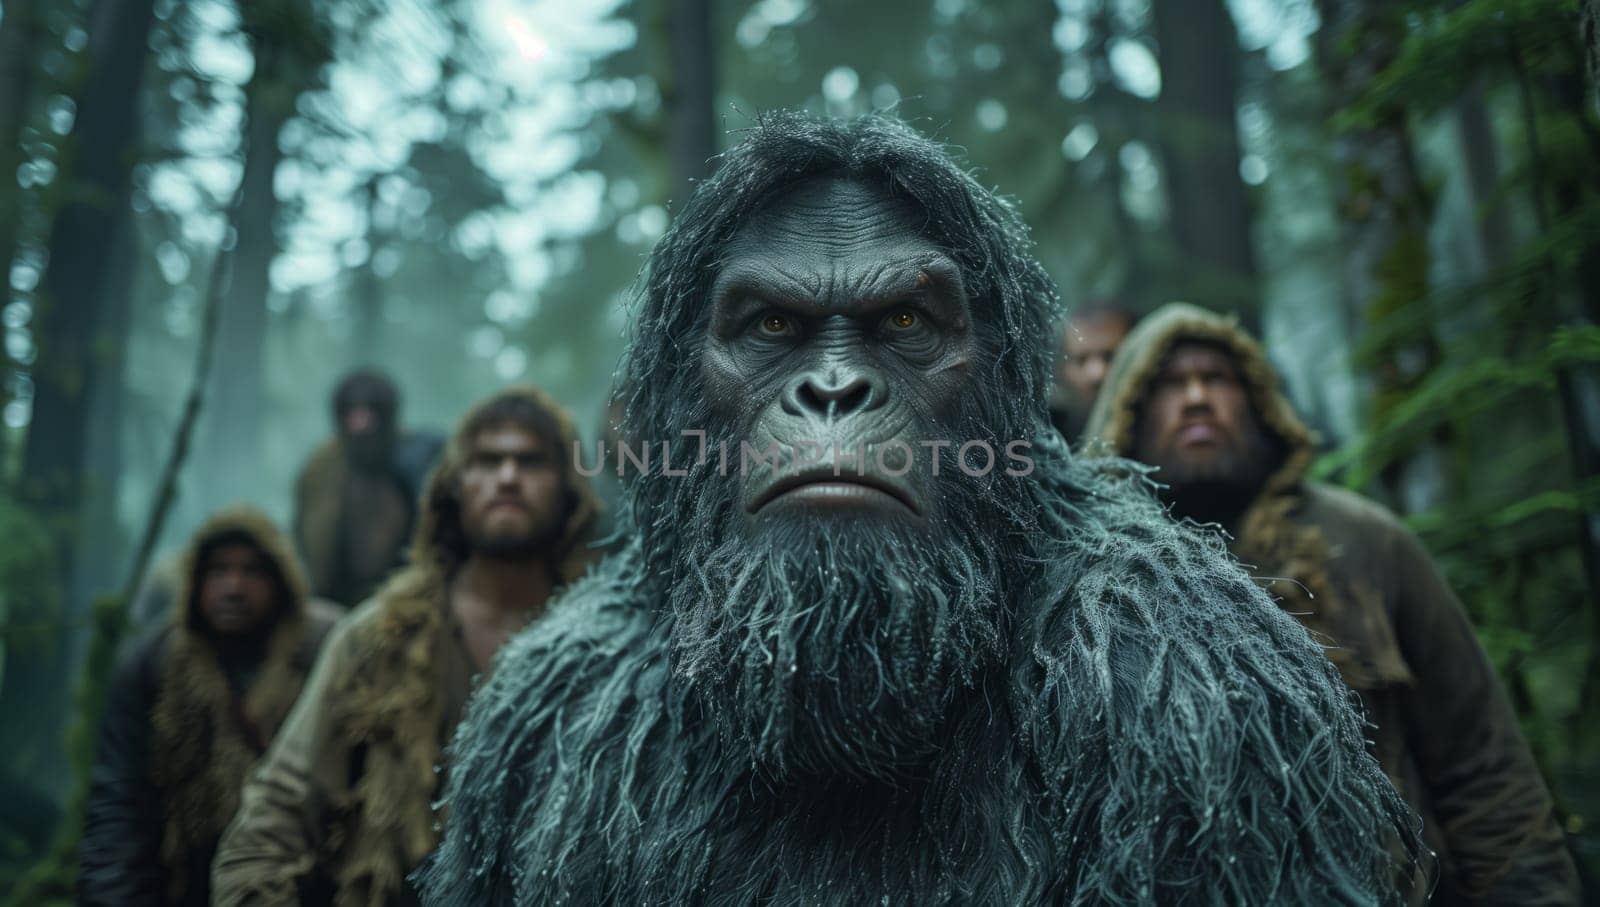 A group of men are standing next to a large primate with a beard in the jungle by richwolf